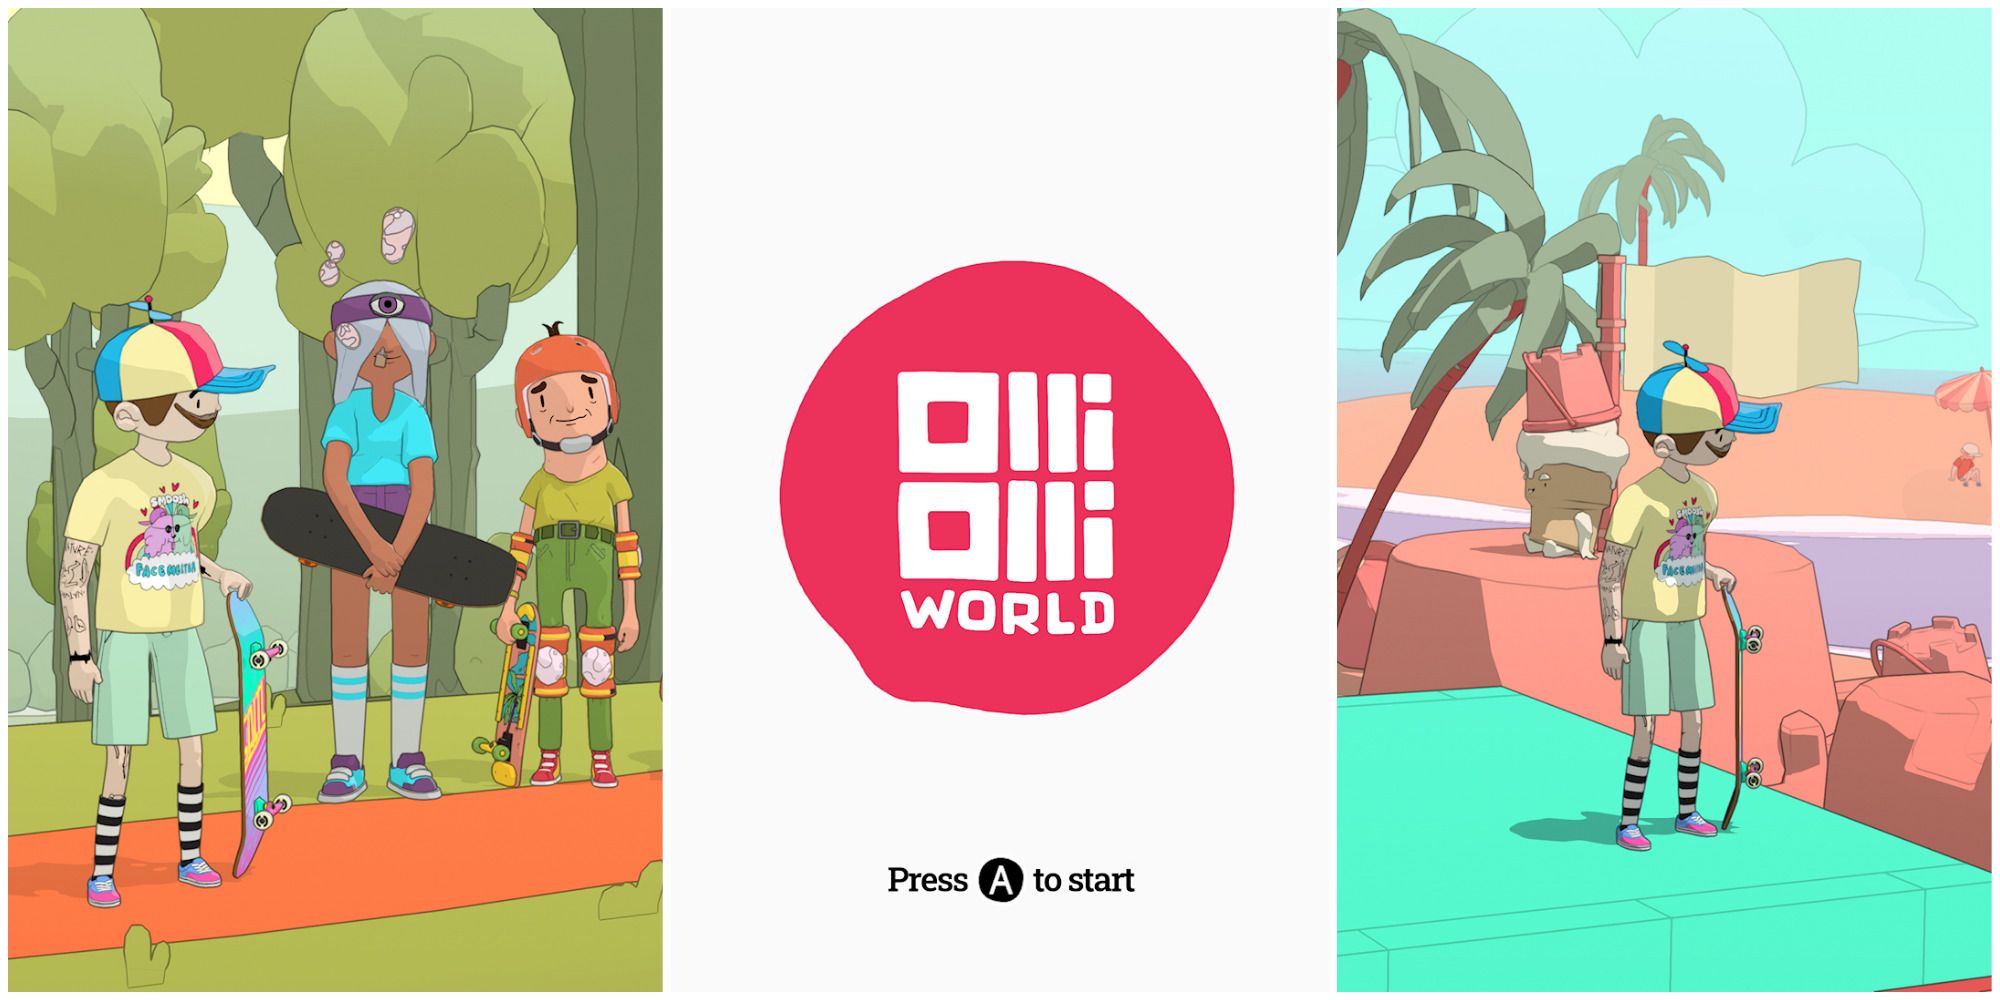 skater and friends in forest, game logo, skater at beach in olliolli world featured